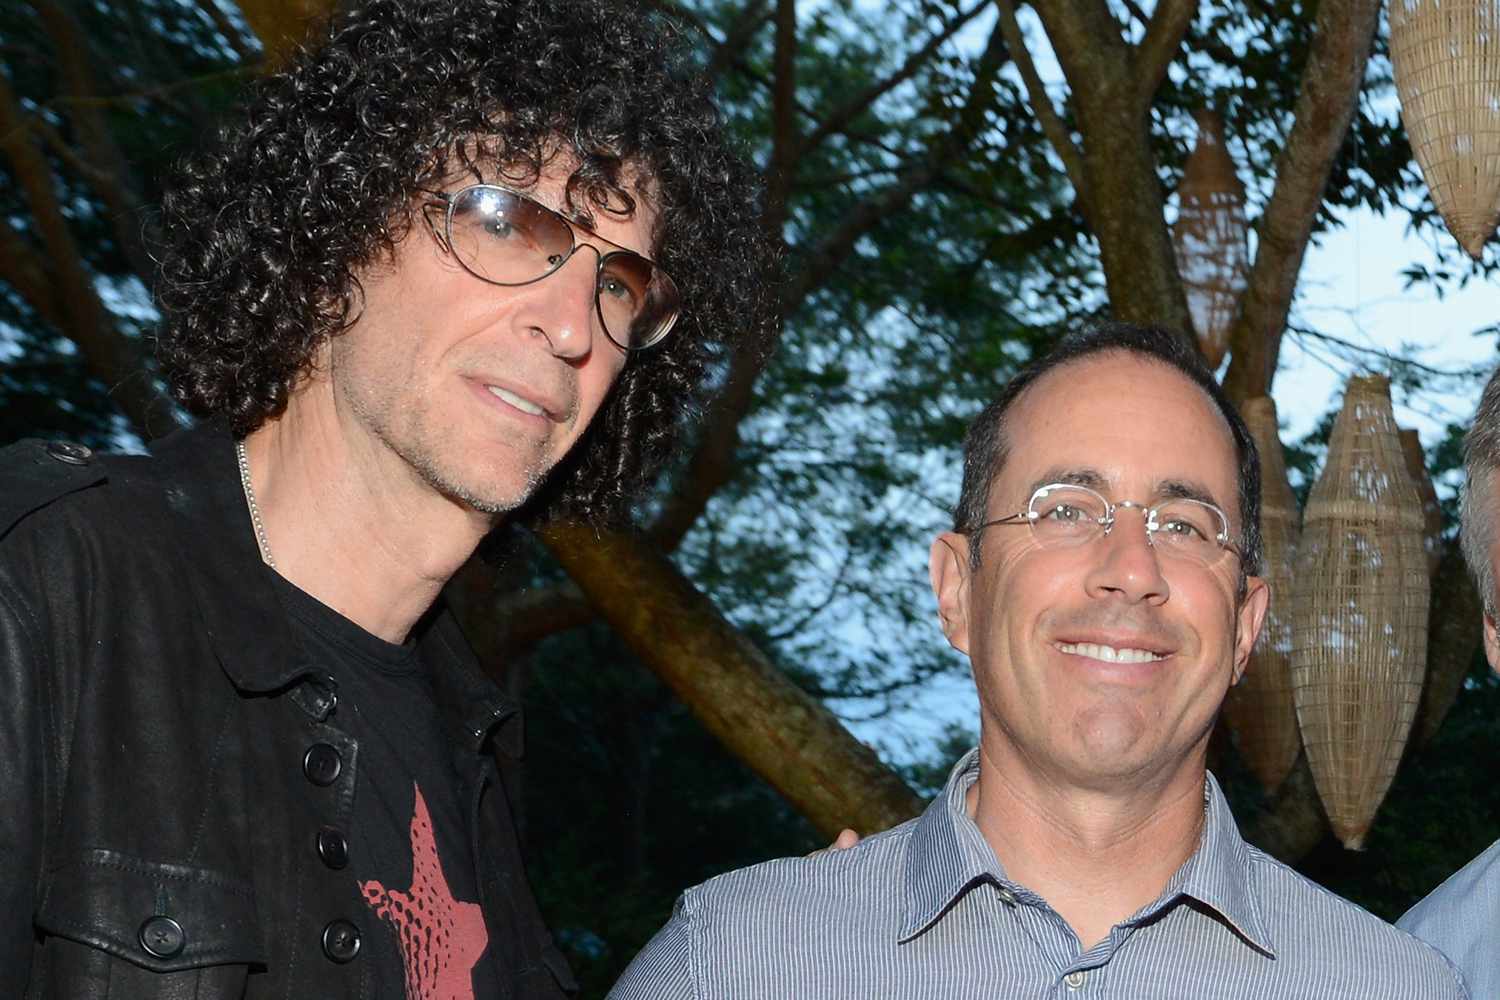 Jerry Seinfeld says Howard Stern has been ‘outflanked’ comedically